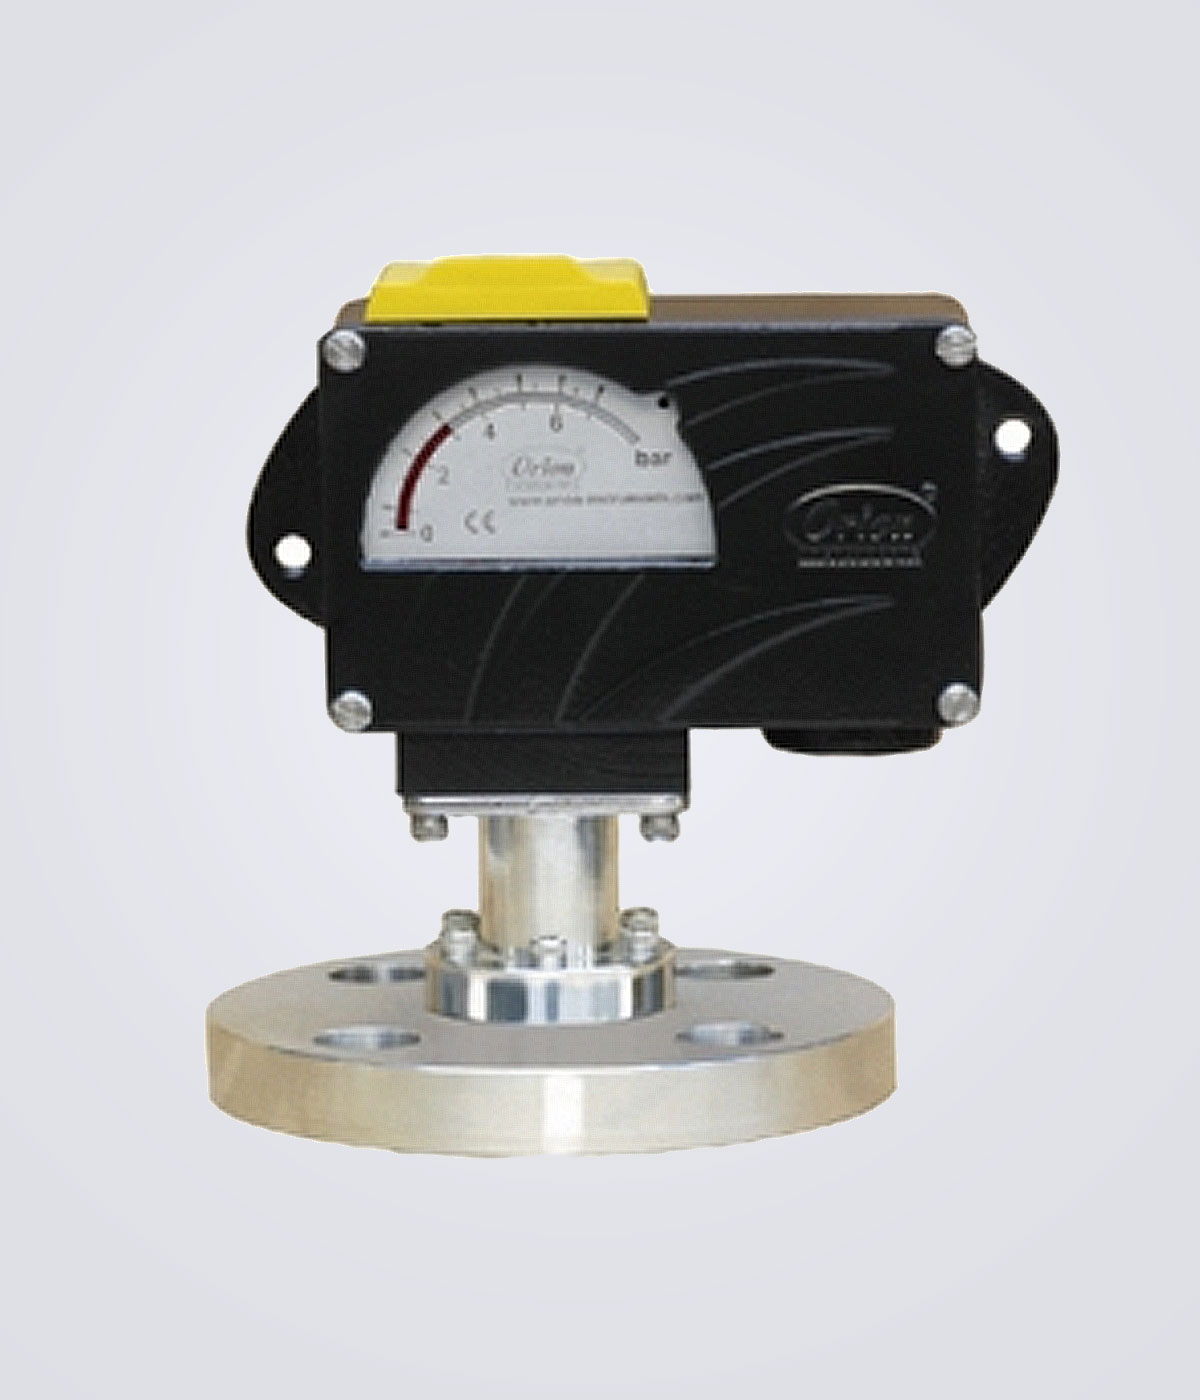 Flanged end Pressure Switches MD Series